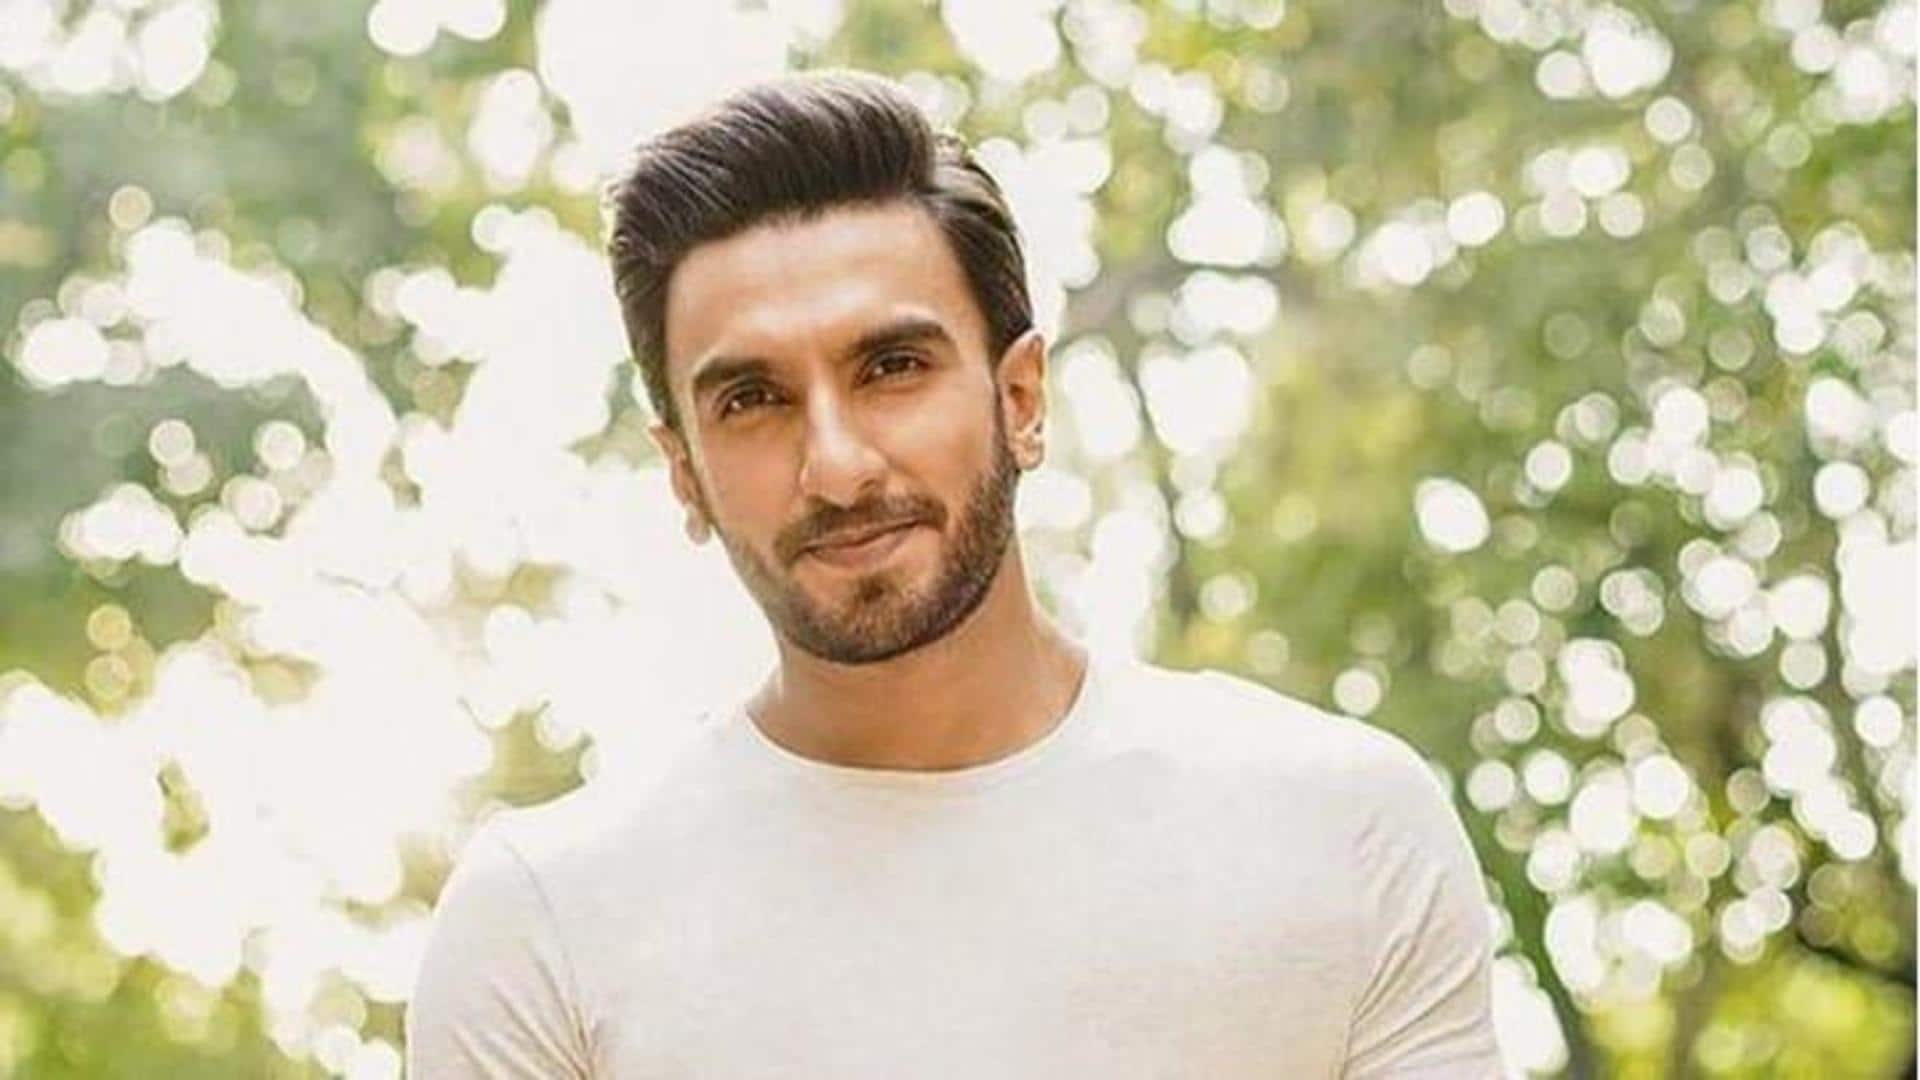 Ranveer Singh's next Don? Times his action avatar impressed us